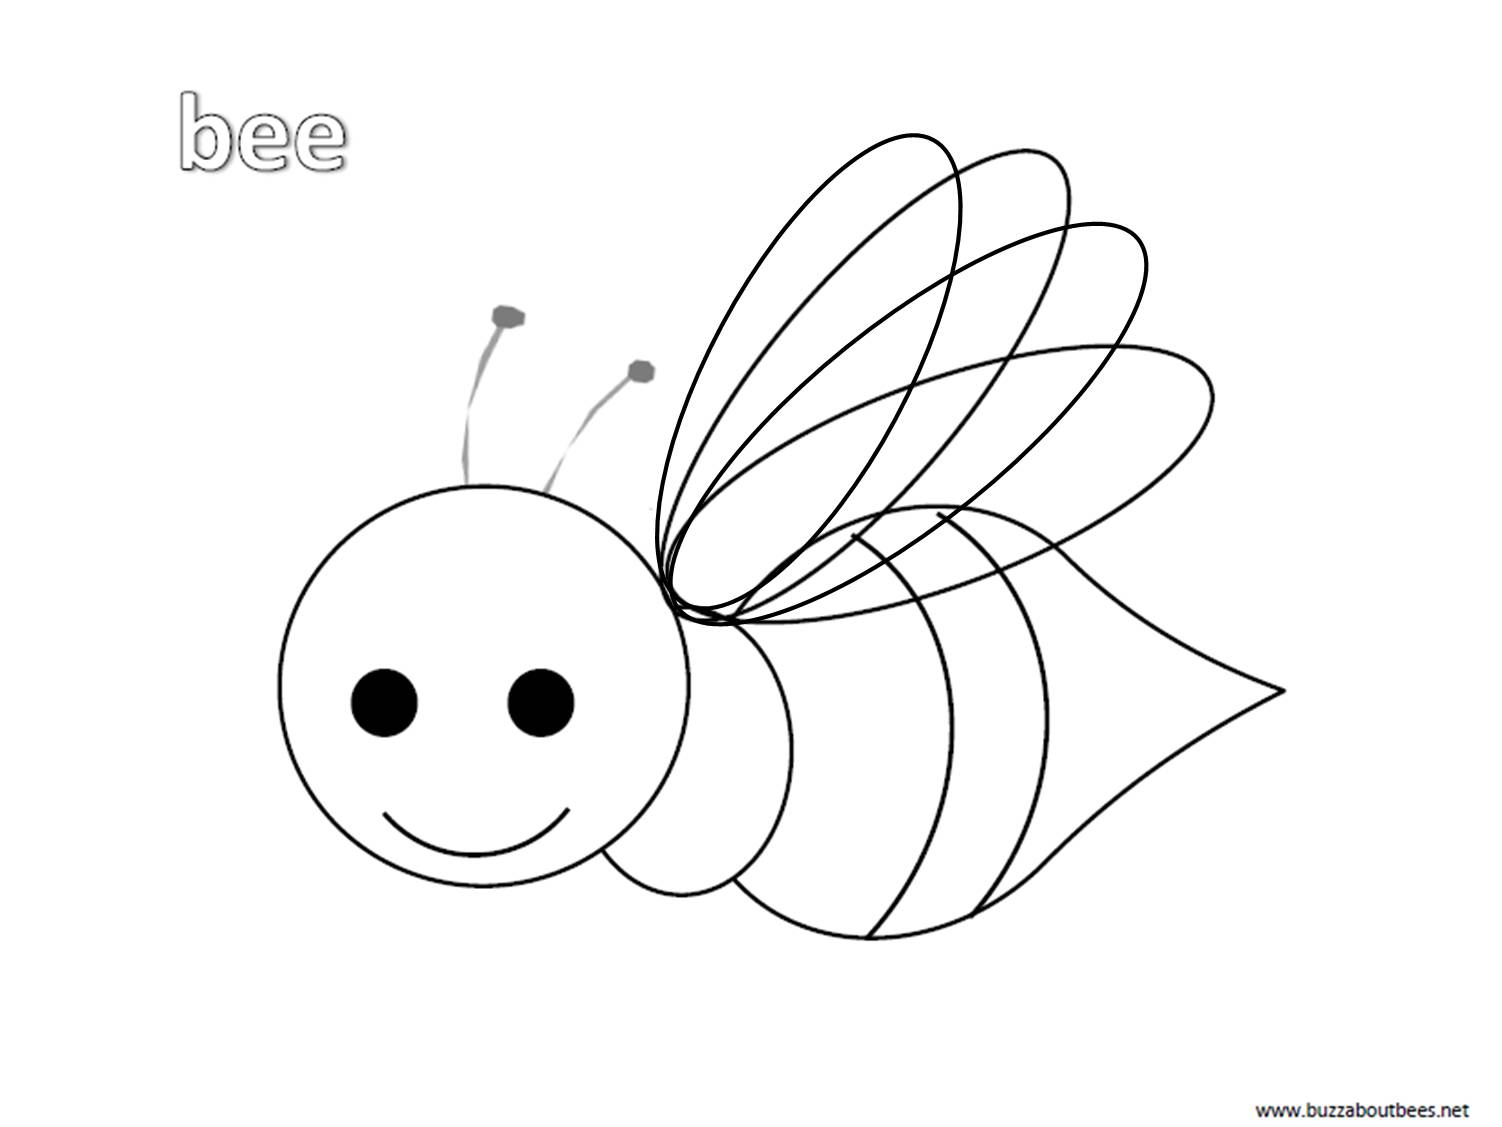 Bee Coloring Pages Free To Download And Print